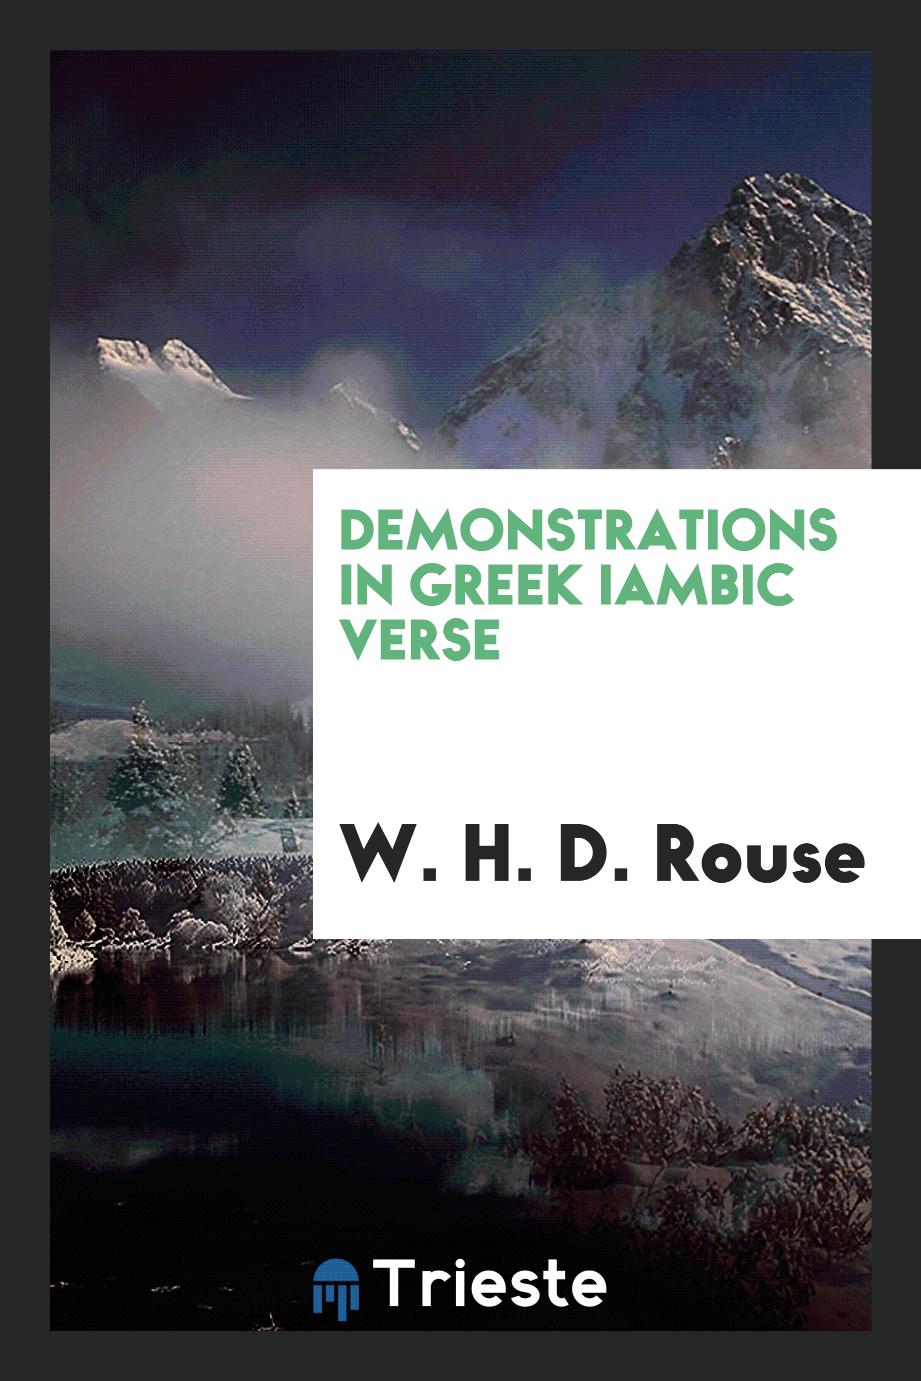 W. H. D. Rouse - Demonstrations in Greek Iambic Verse